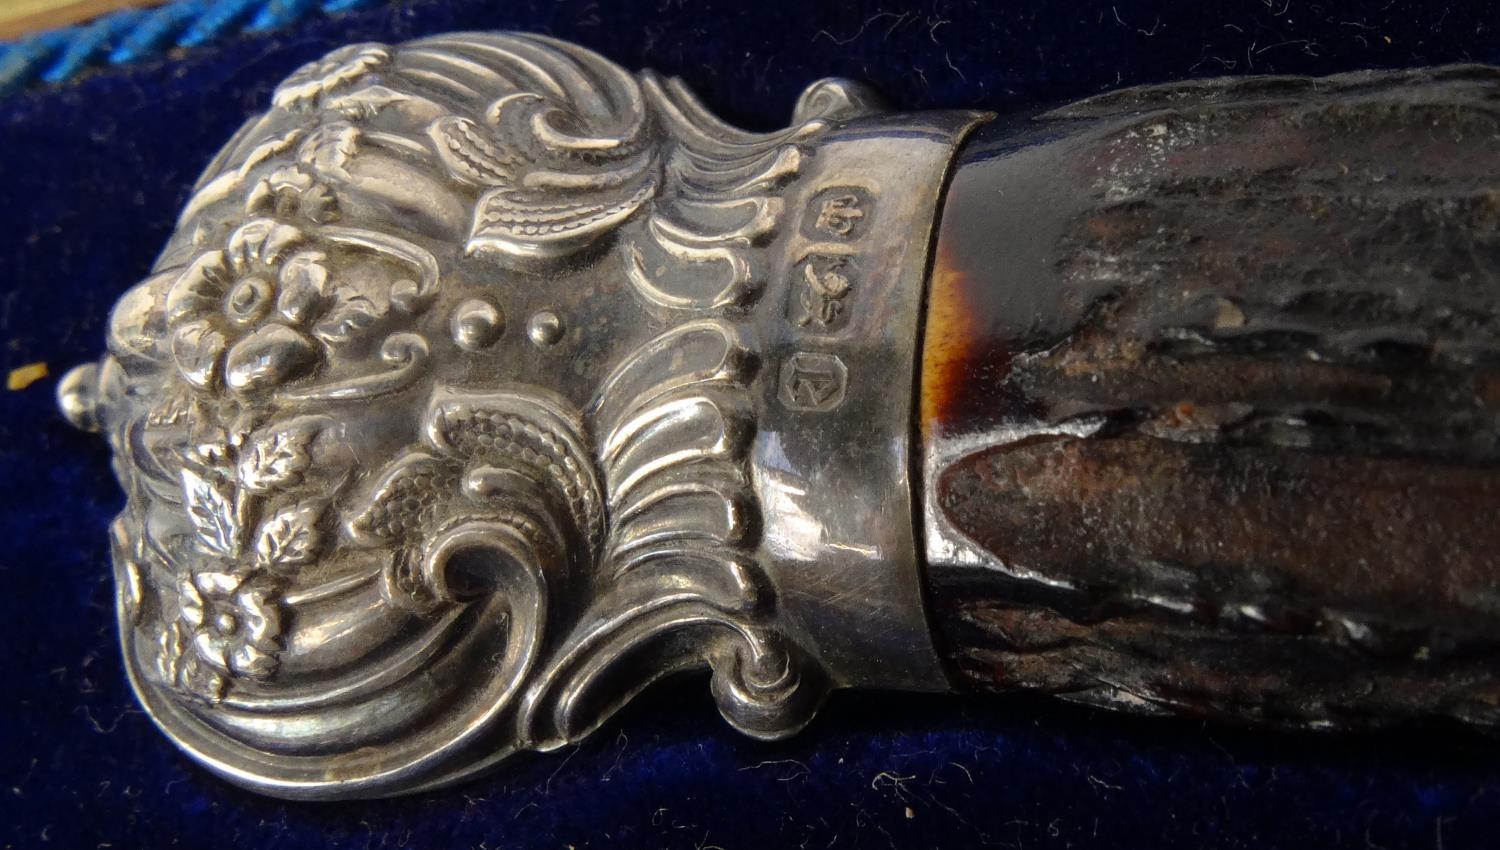 Levesley Brothers Sheffield horn handled carving set with silver finials, Sheffiedl 1897-98, in a - Image 5 of 8